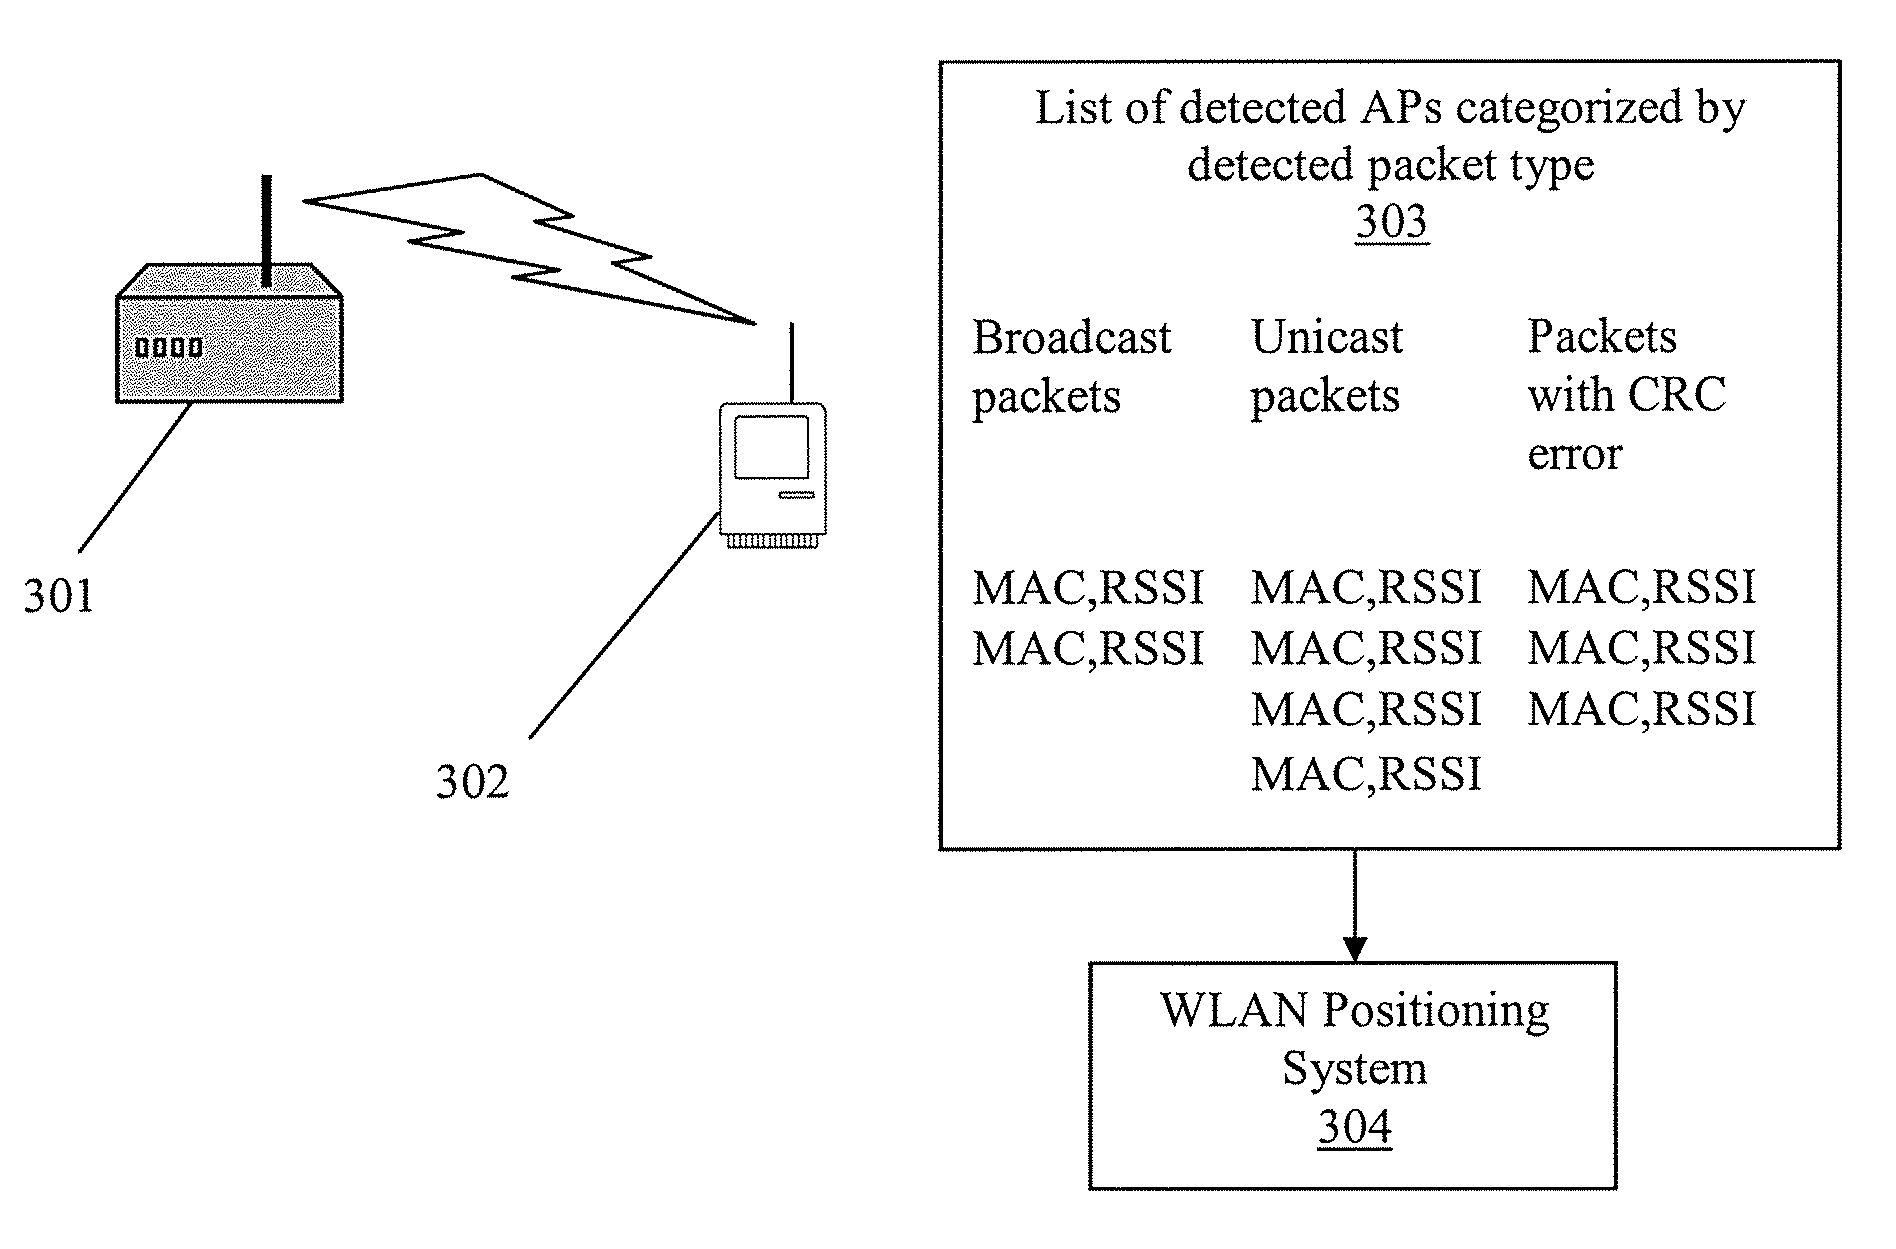 System and method of gathering and caching WLAN packet information to improve position estimates of a WLAN positioning device